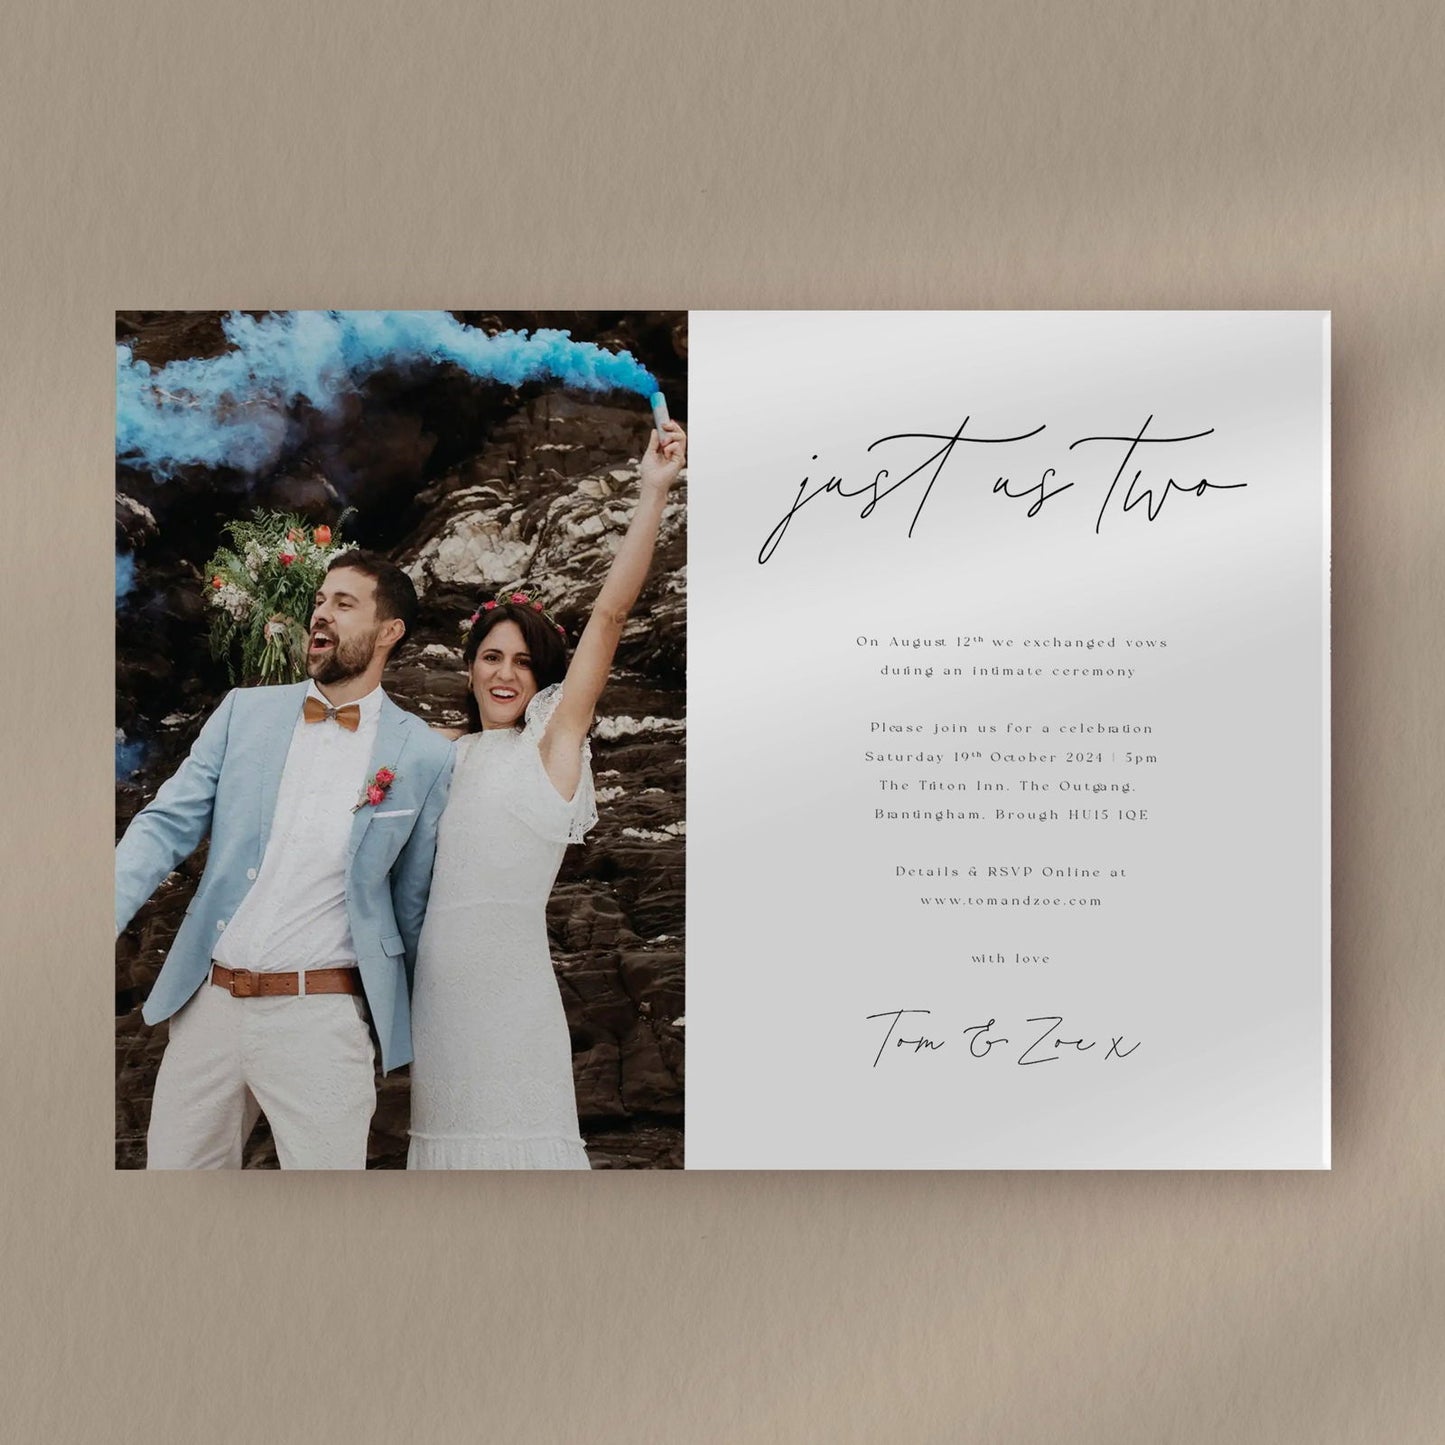 Just Us Two Eloped Reception Invitation  Ivy and Gold Wedding Stationery   